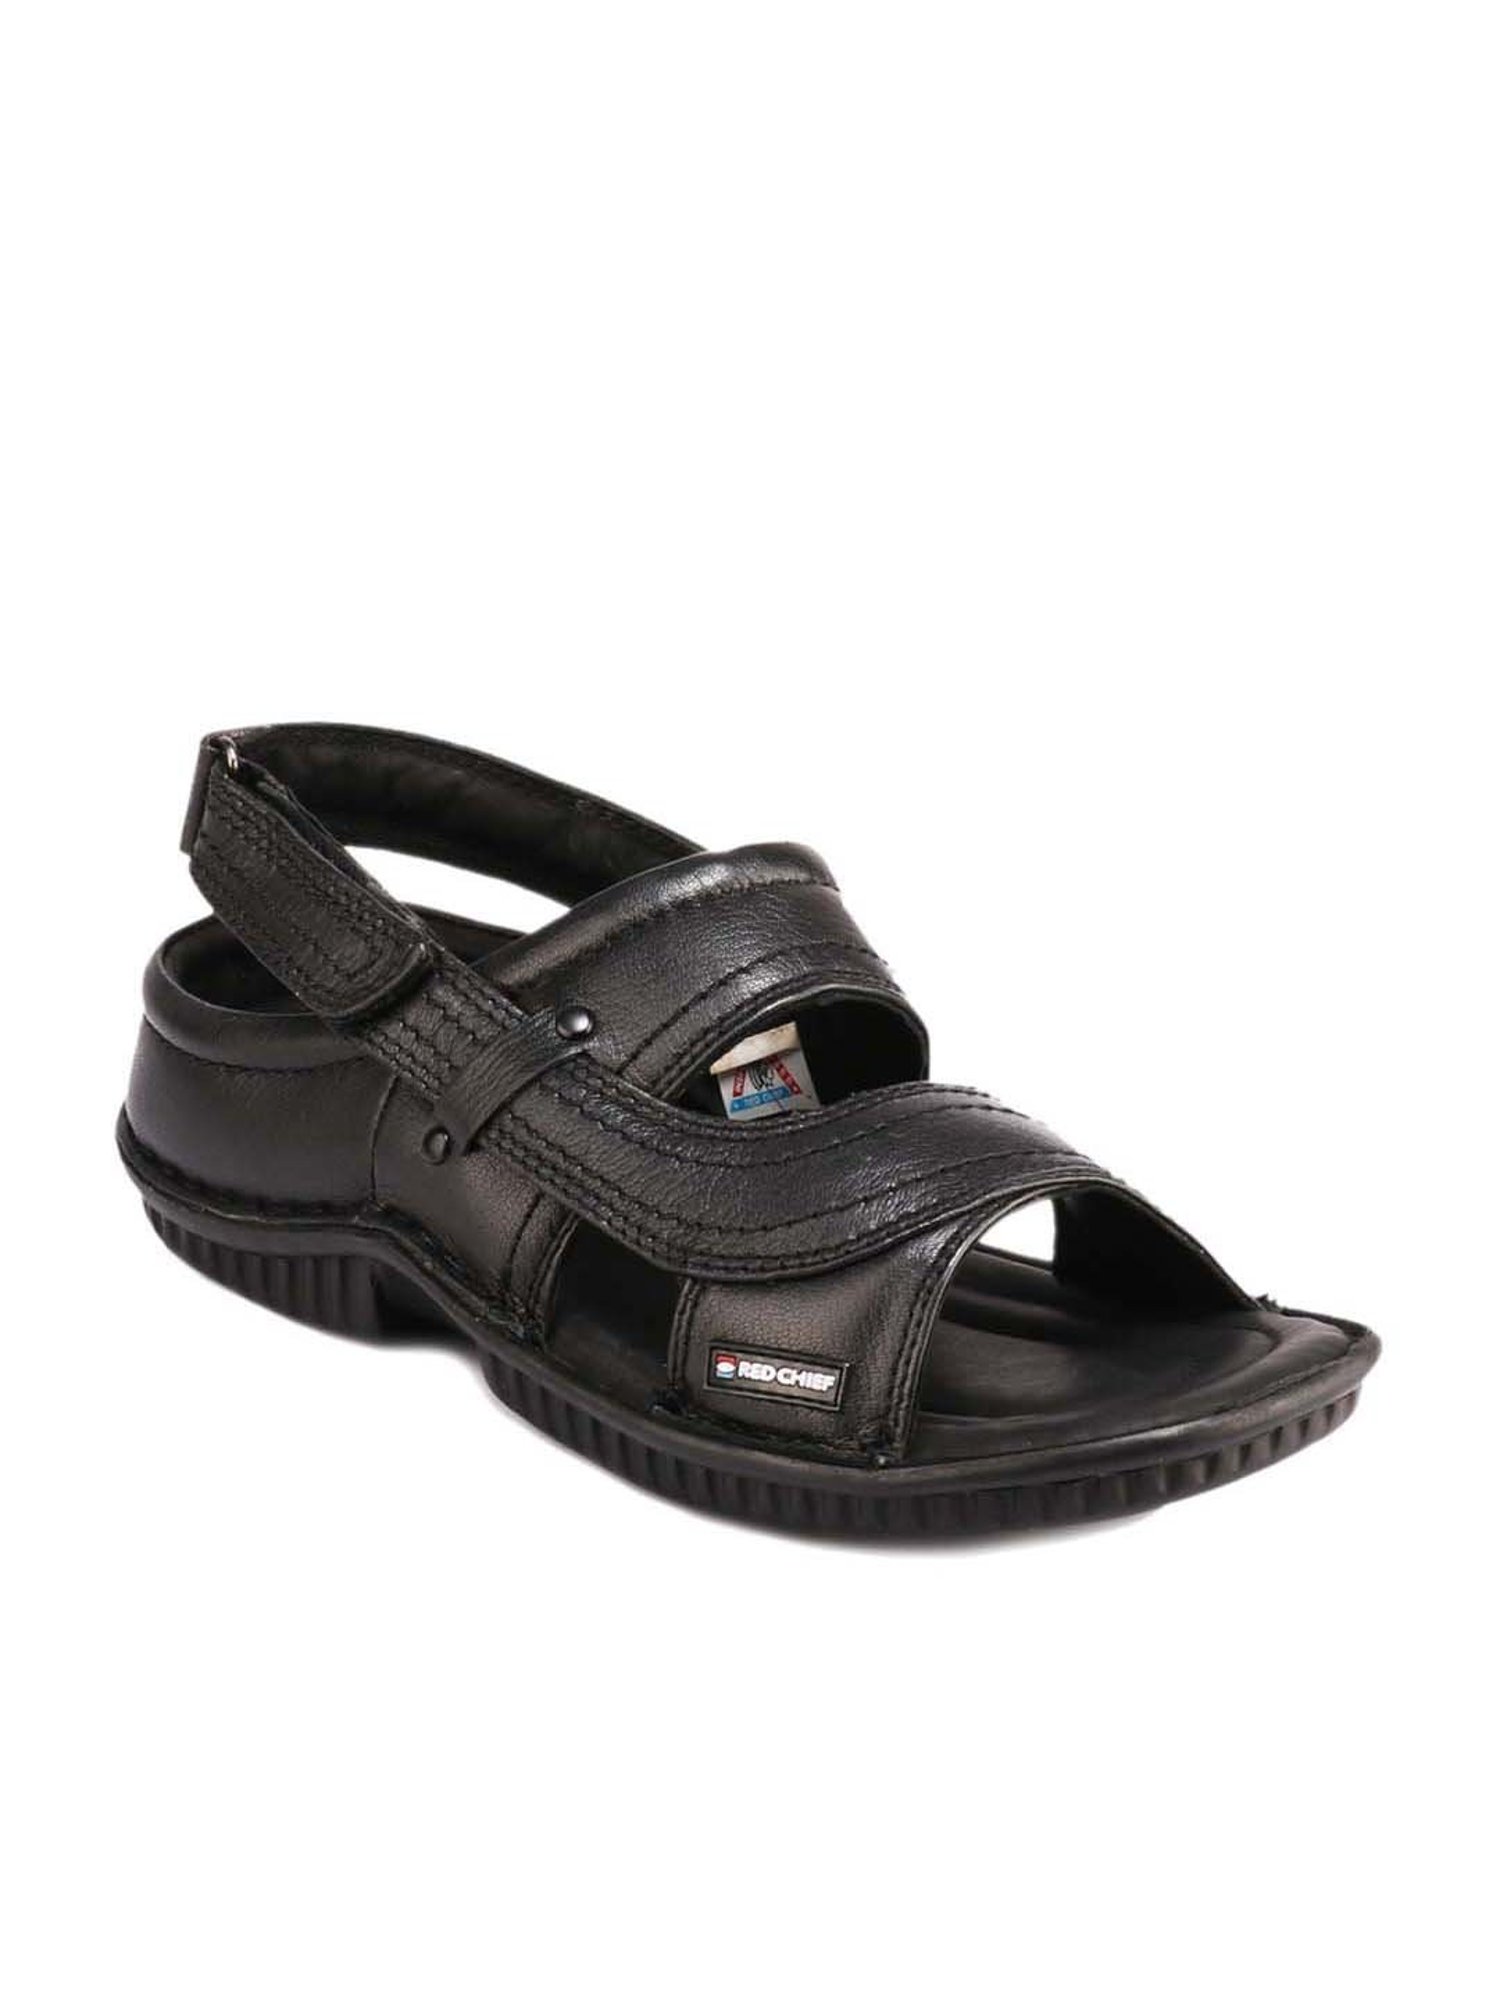 Red Chief Brand Men's RC377 Casual Chappal/Sandal (Black) :: RAJASHOES